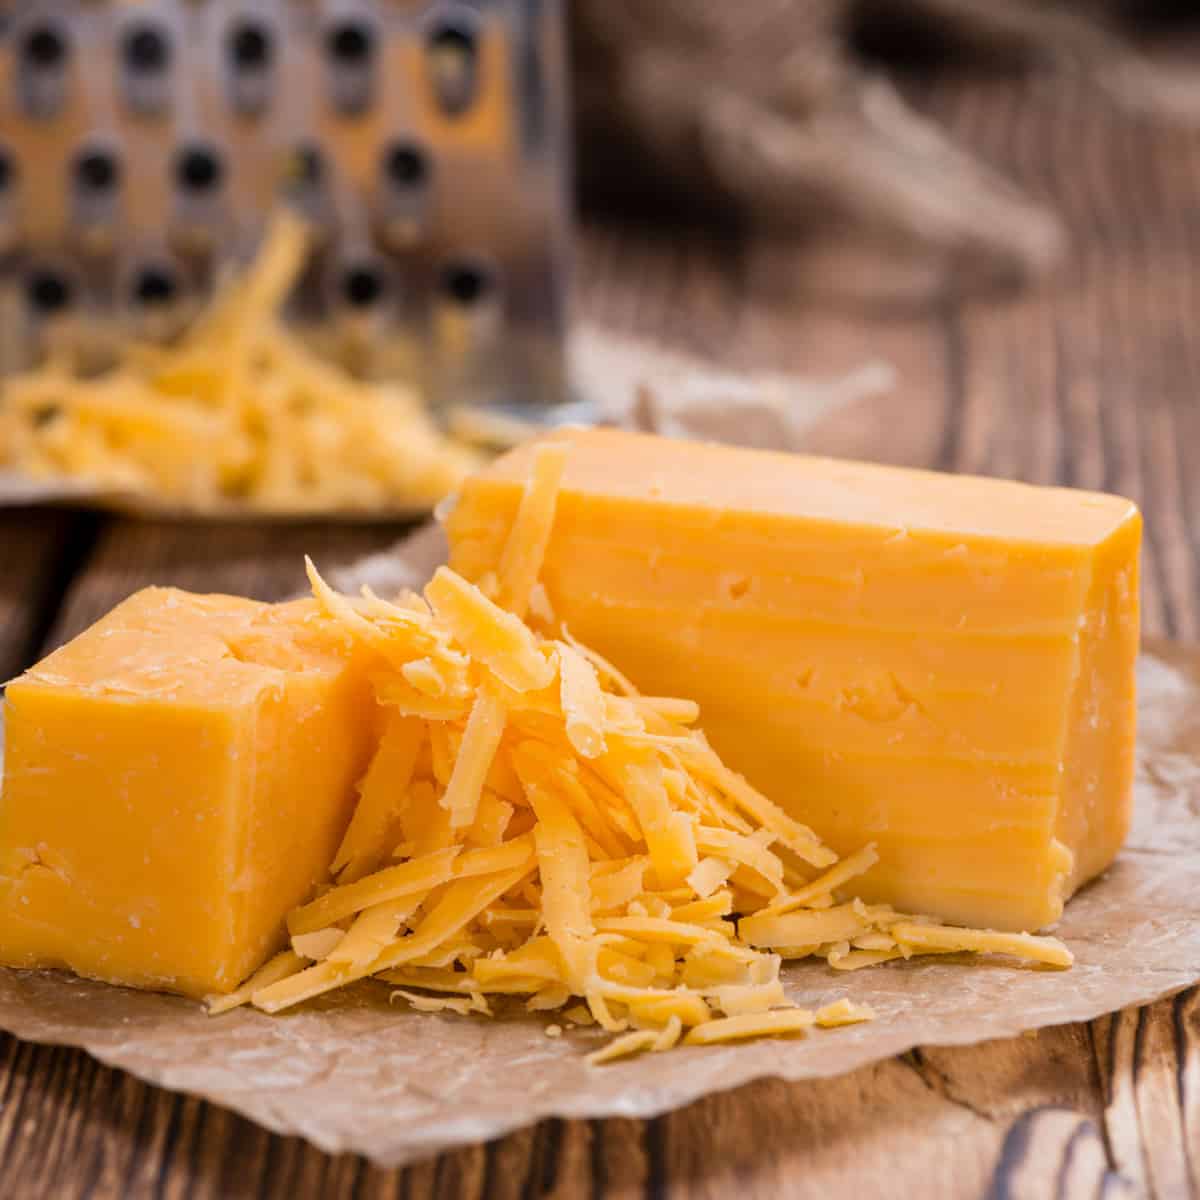 block of cheddar cheese, with some grated in the foreground